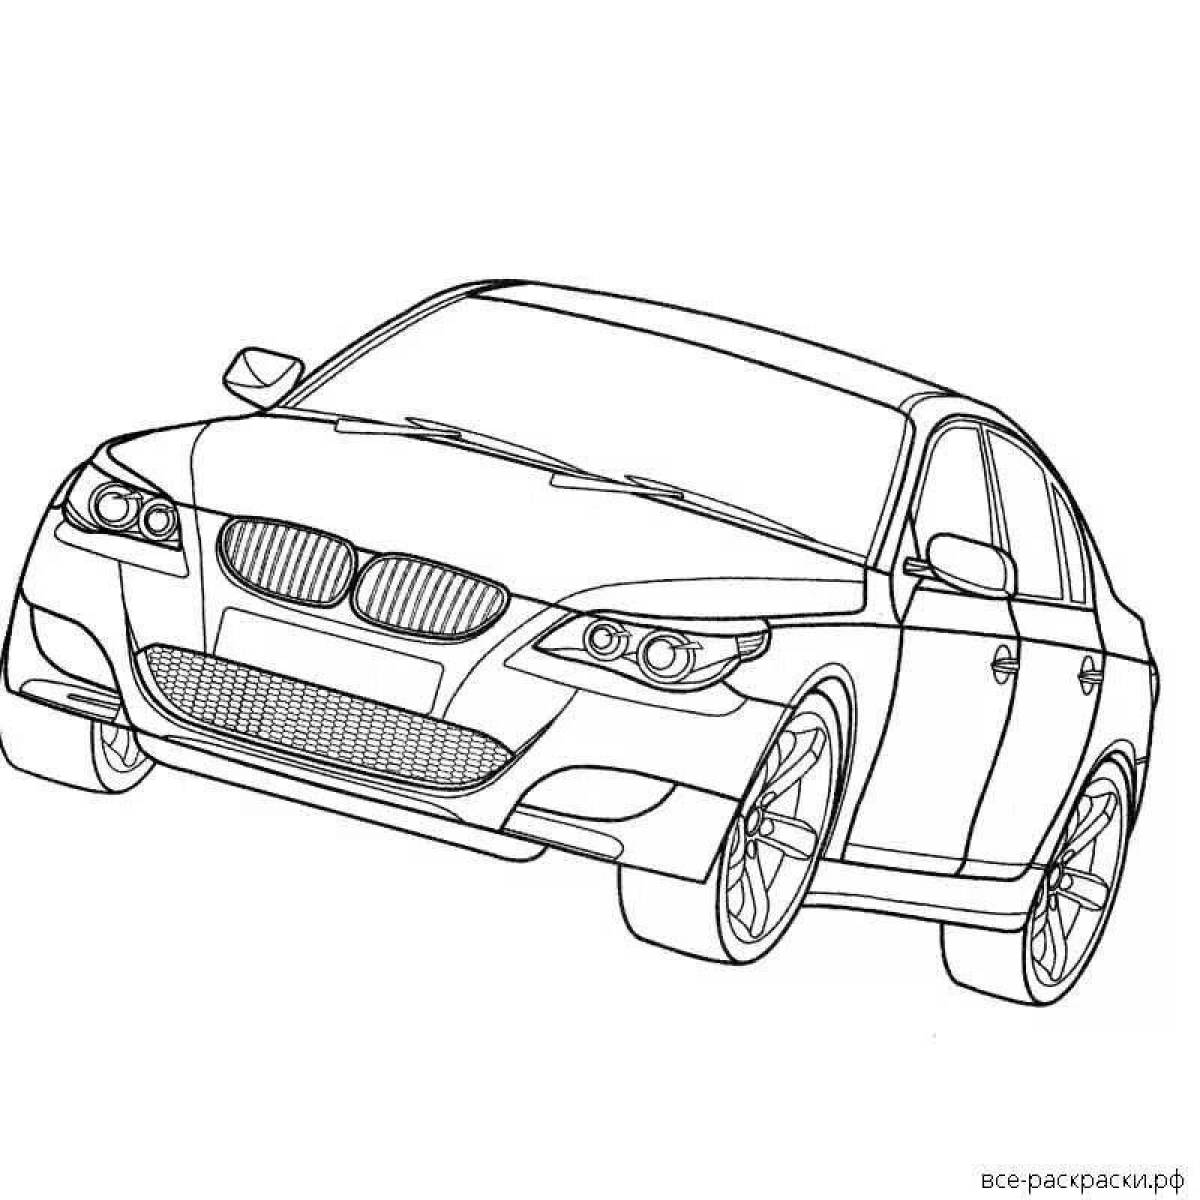 Dazzling bmw m5 f90 coloring book